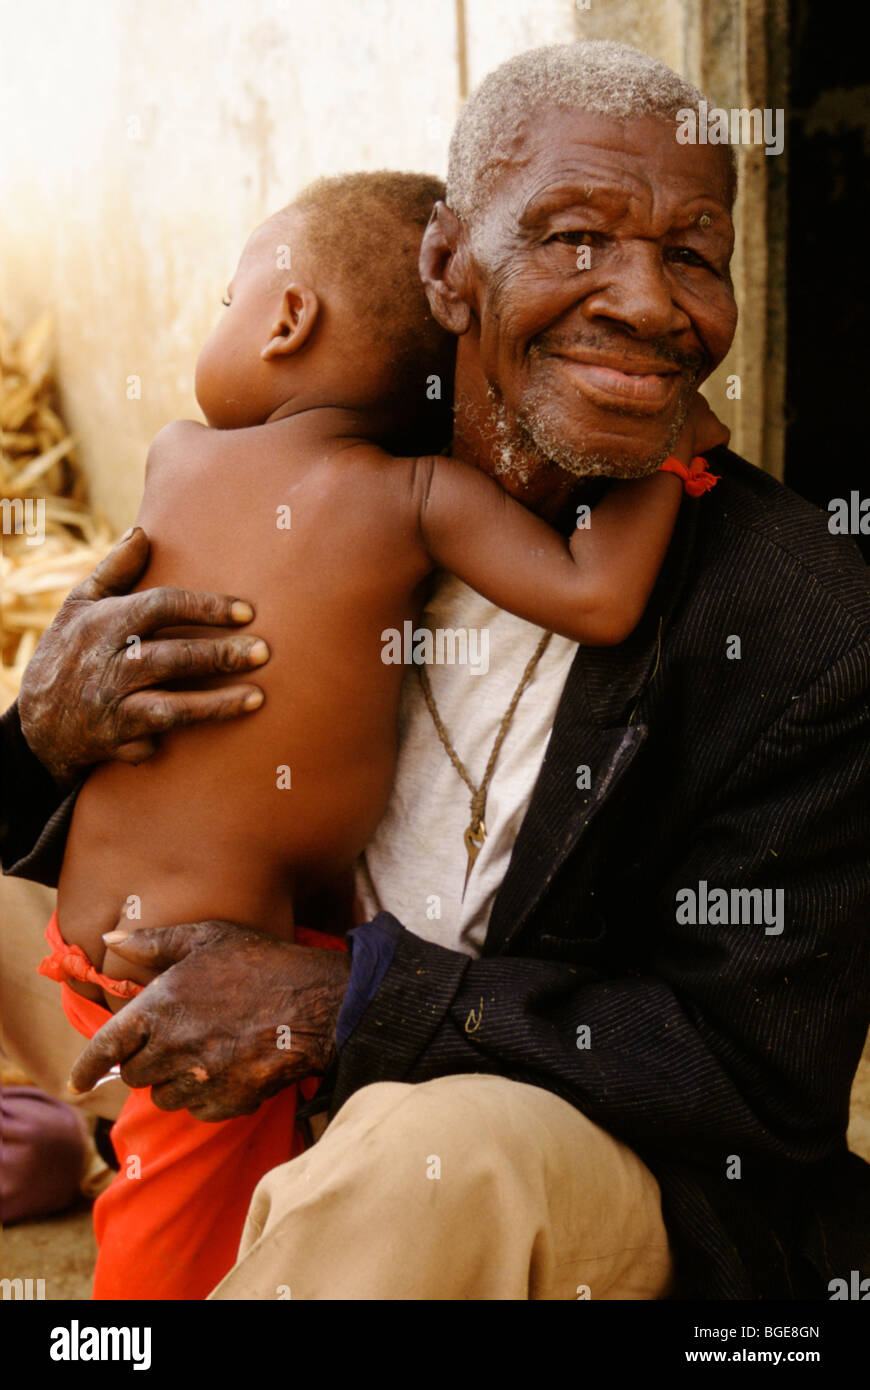 A resident in a leper colony, Luanda, Angola, holds his young son Stock Photo